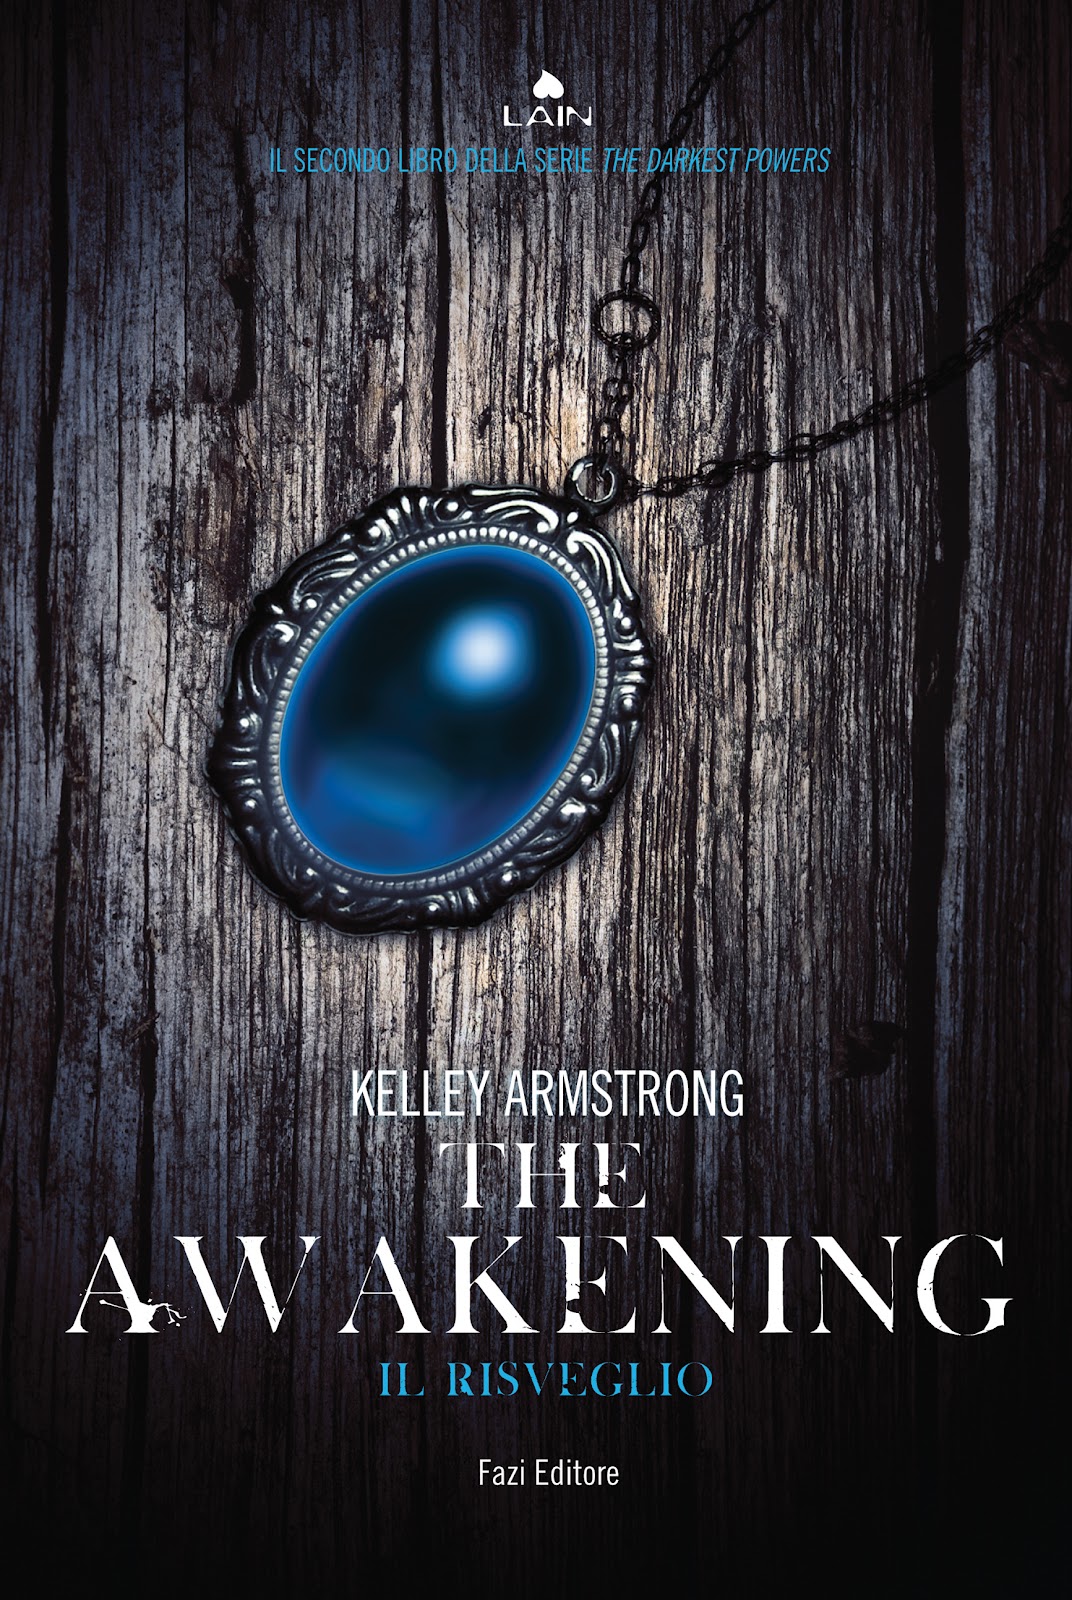 More about The awakening